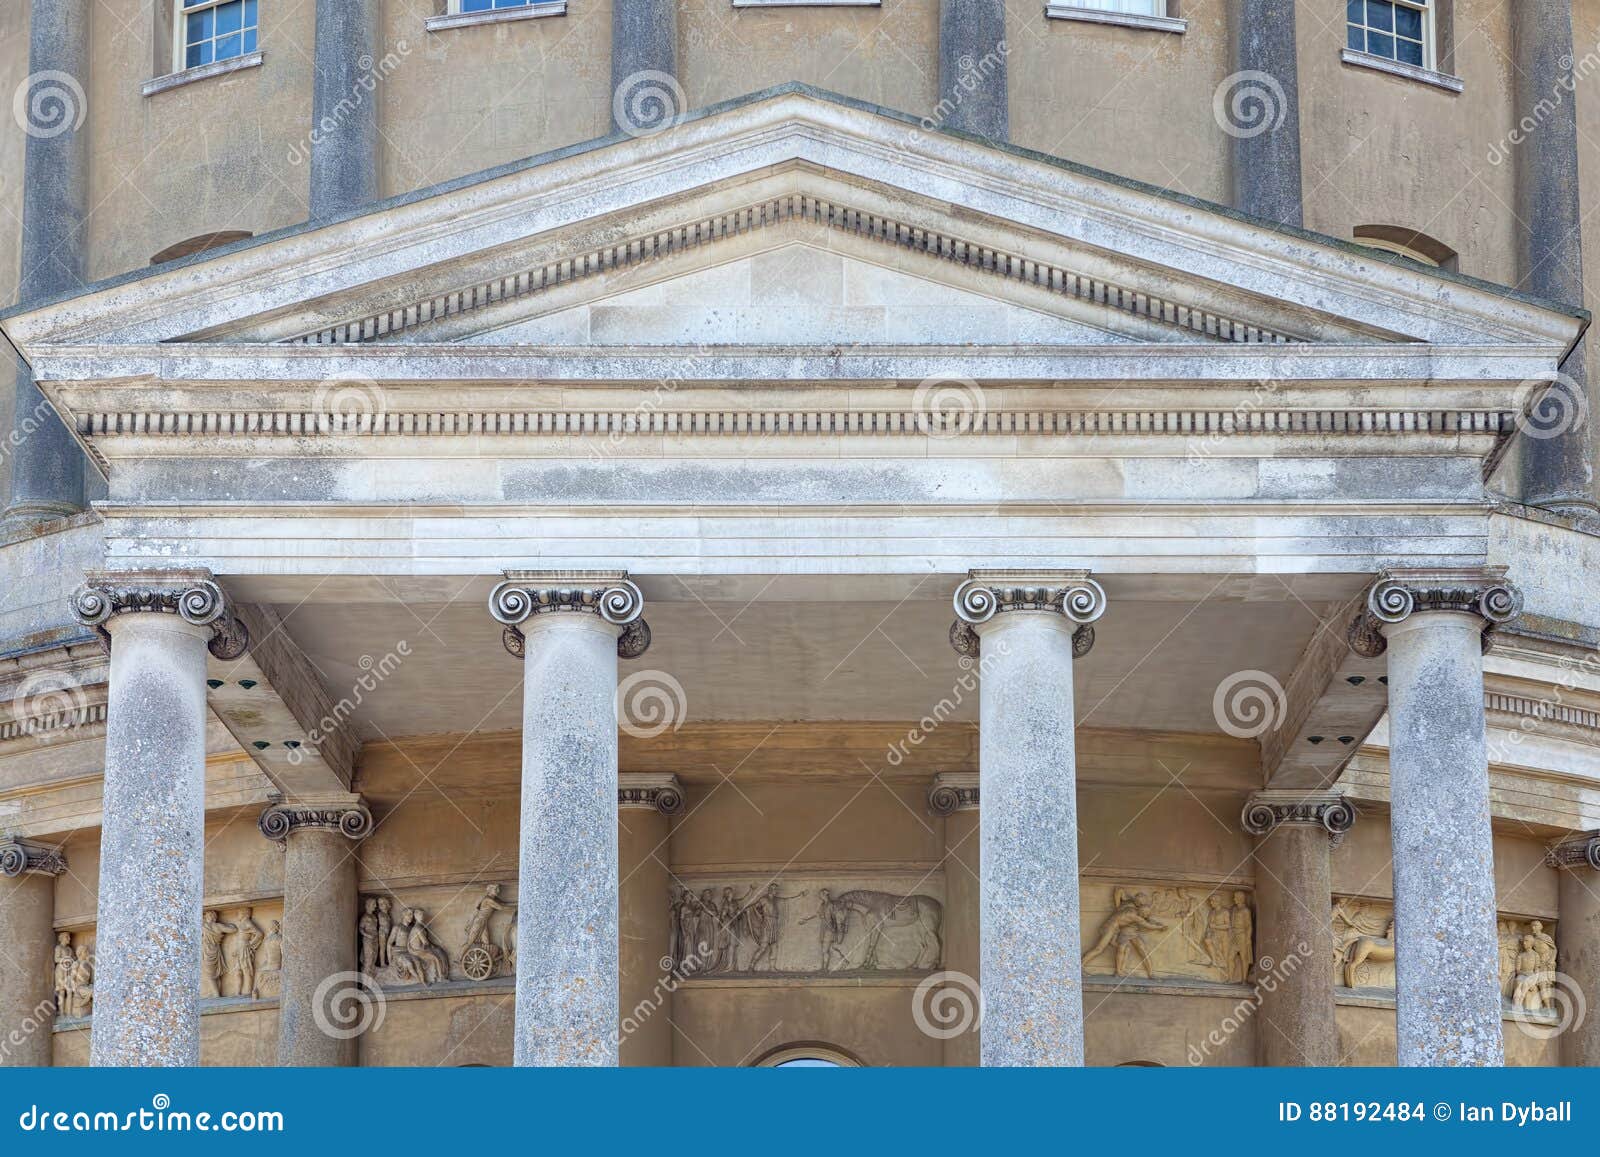 ionic classical order of columns architecture